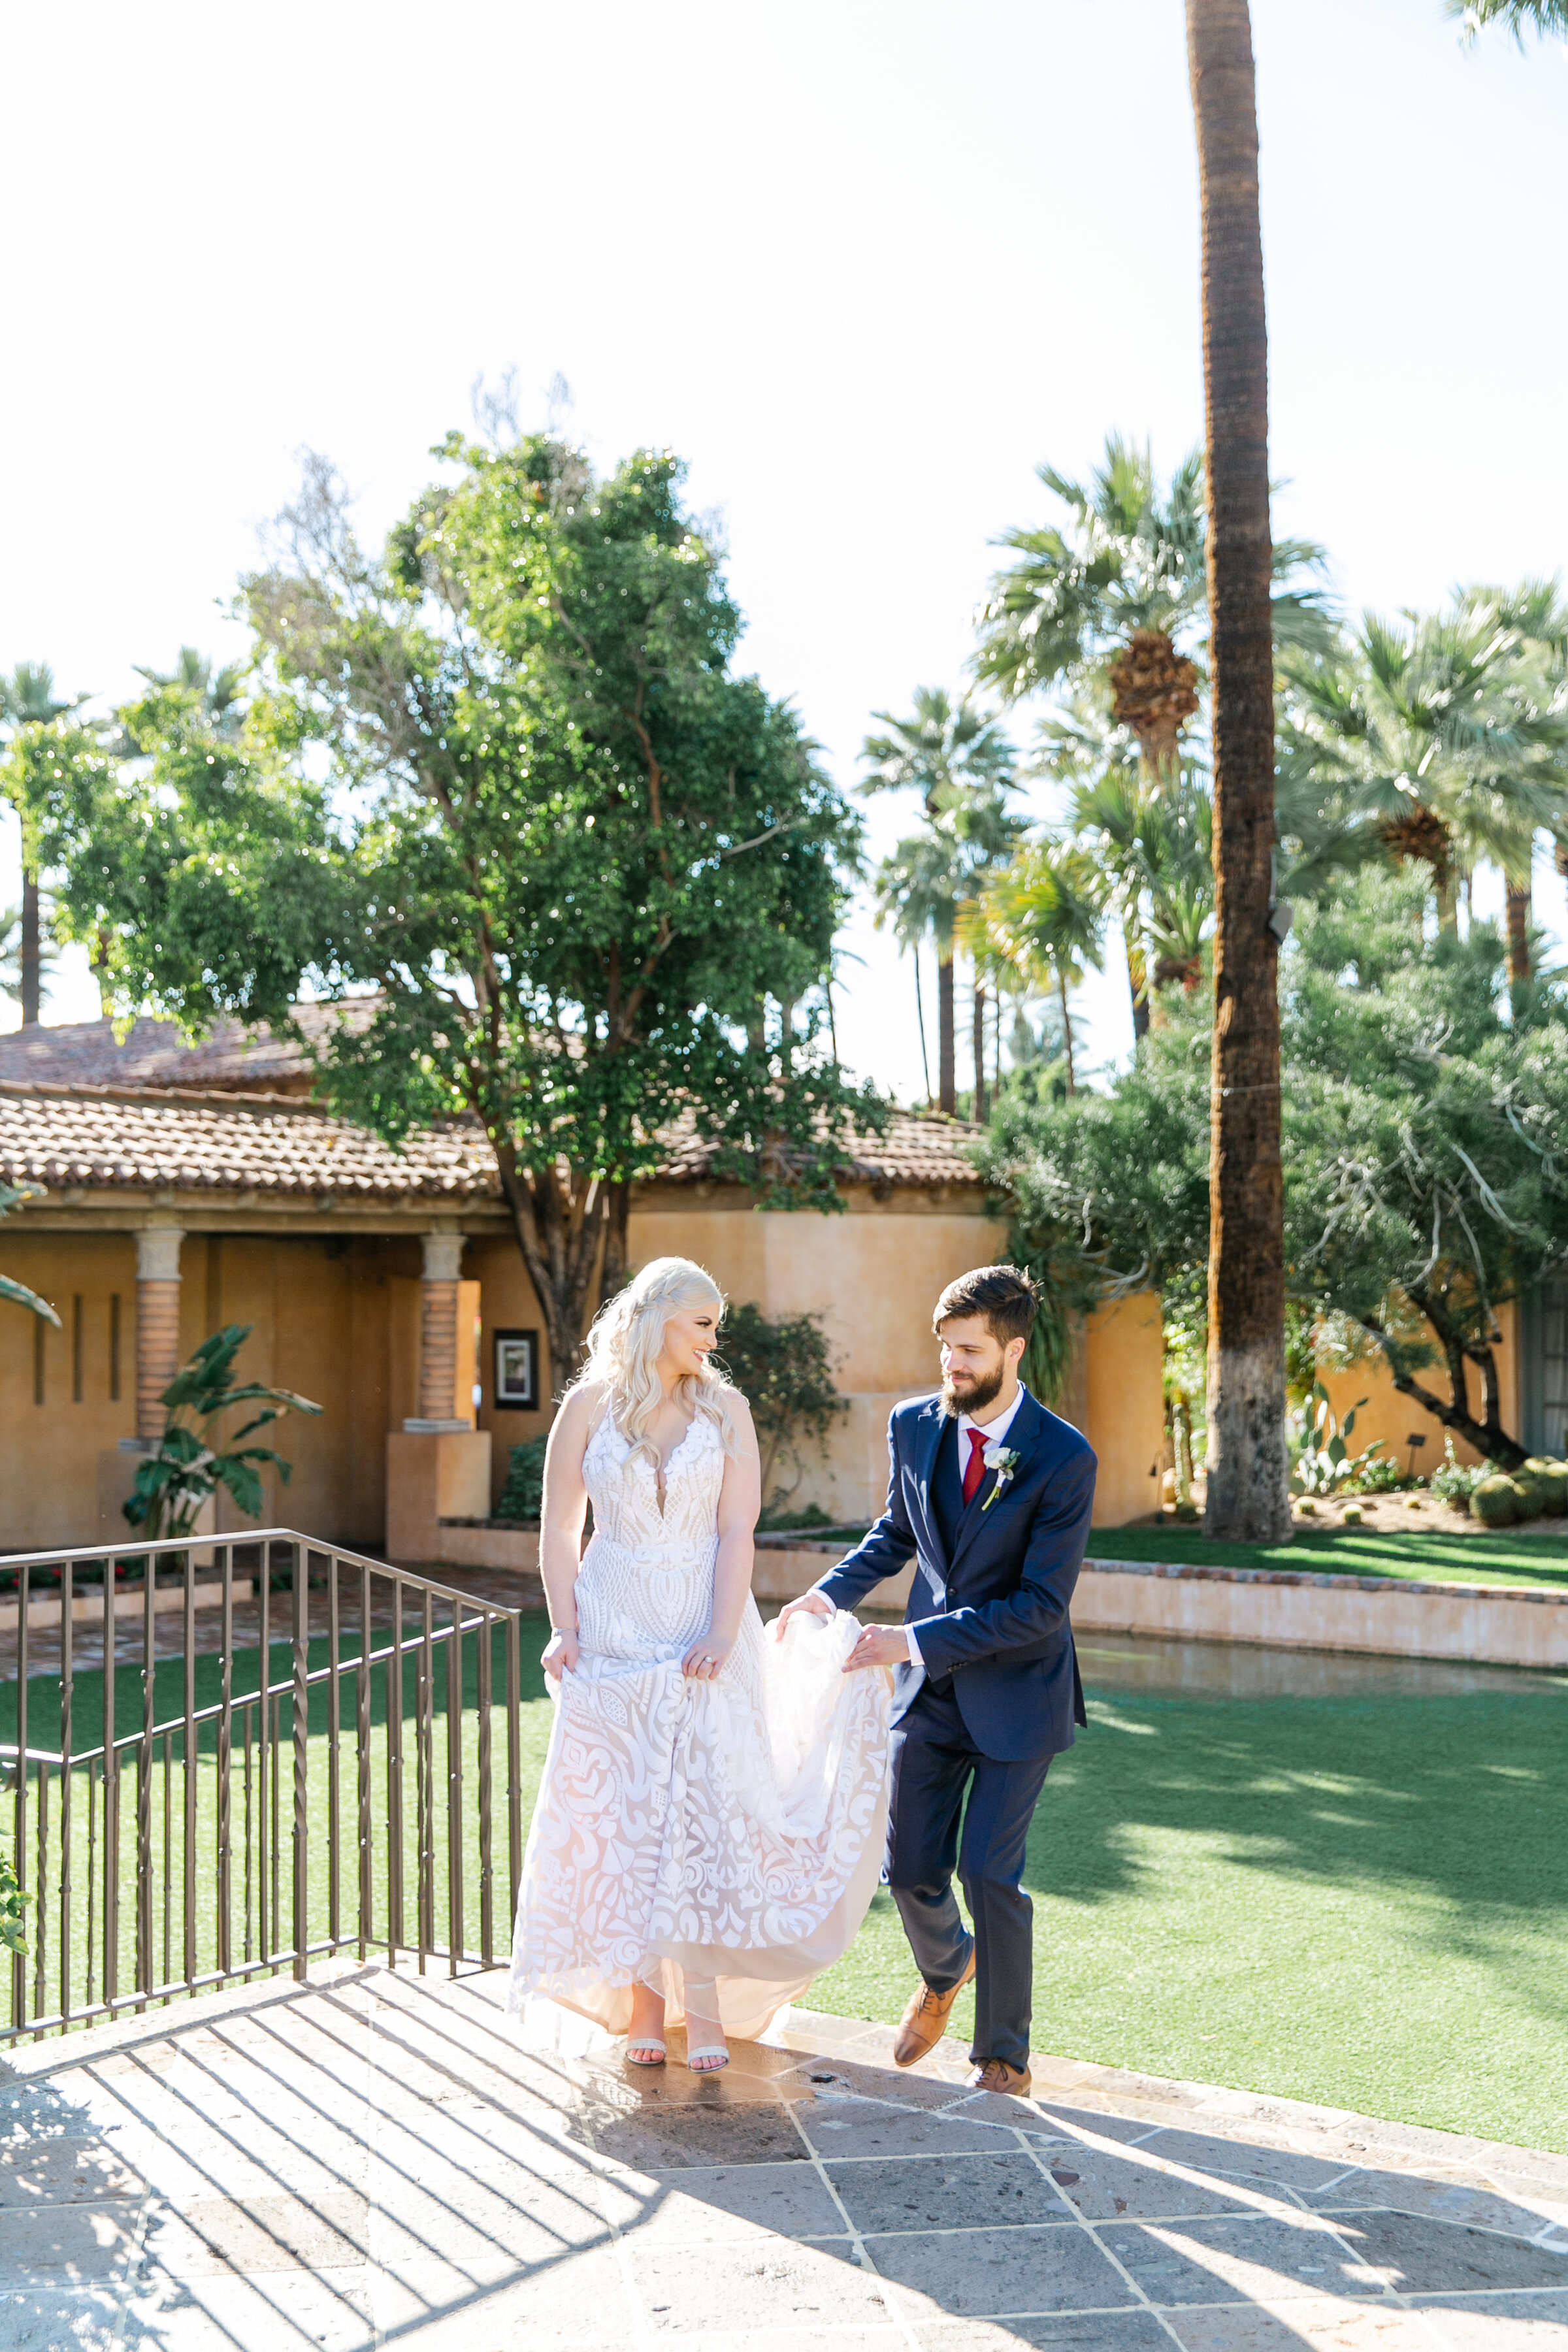 Karlie Colleen Photography - The Royal Palms Wedding - Some Like It Classic - Alex & Sam-178